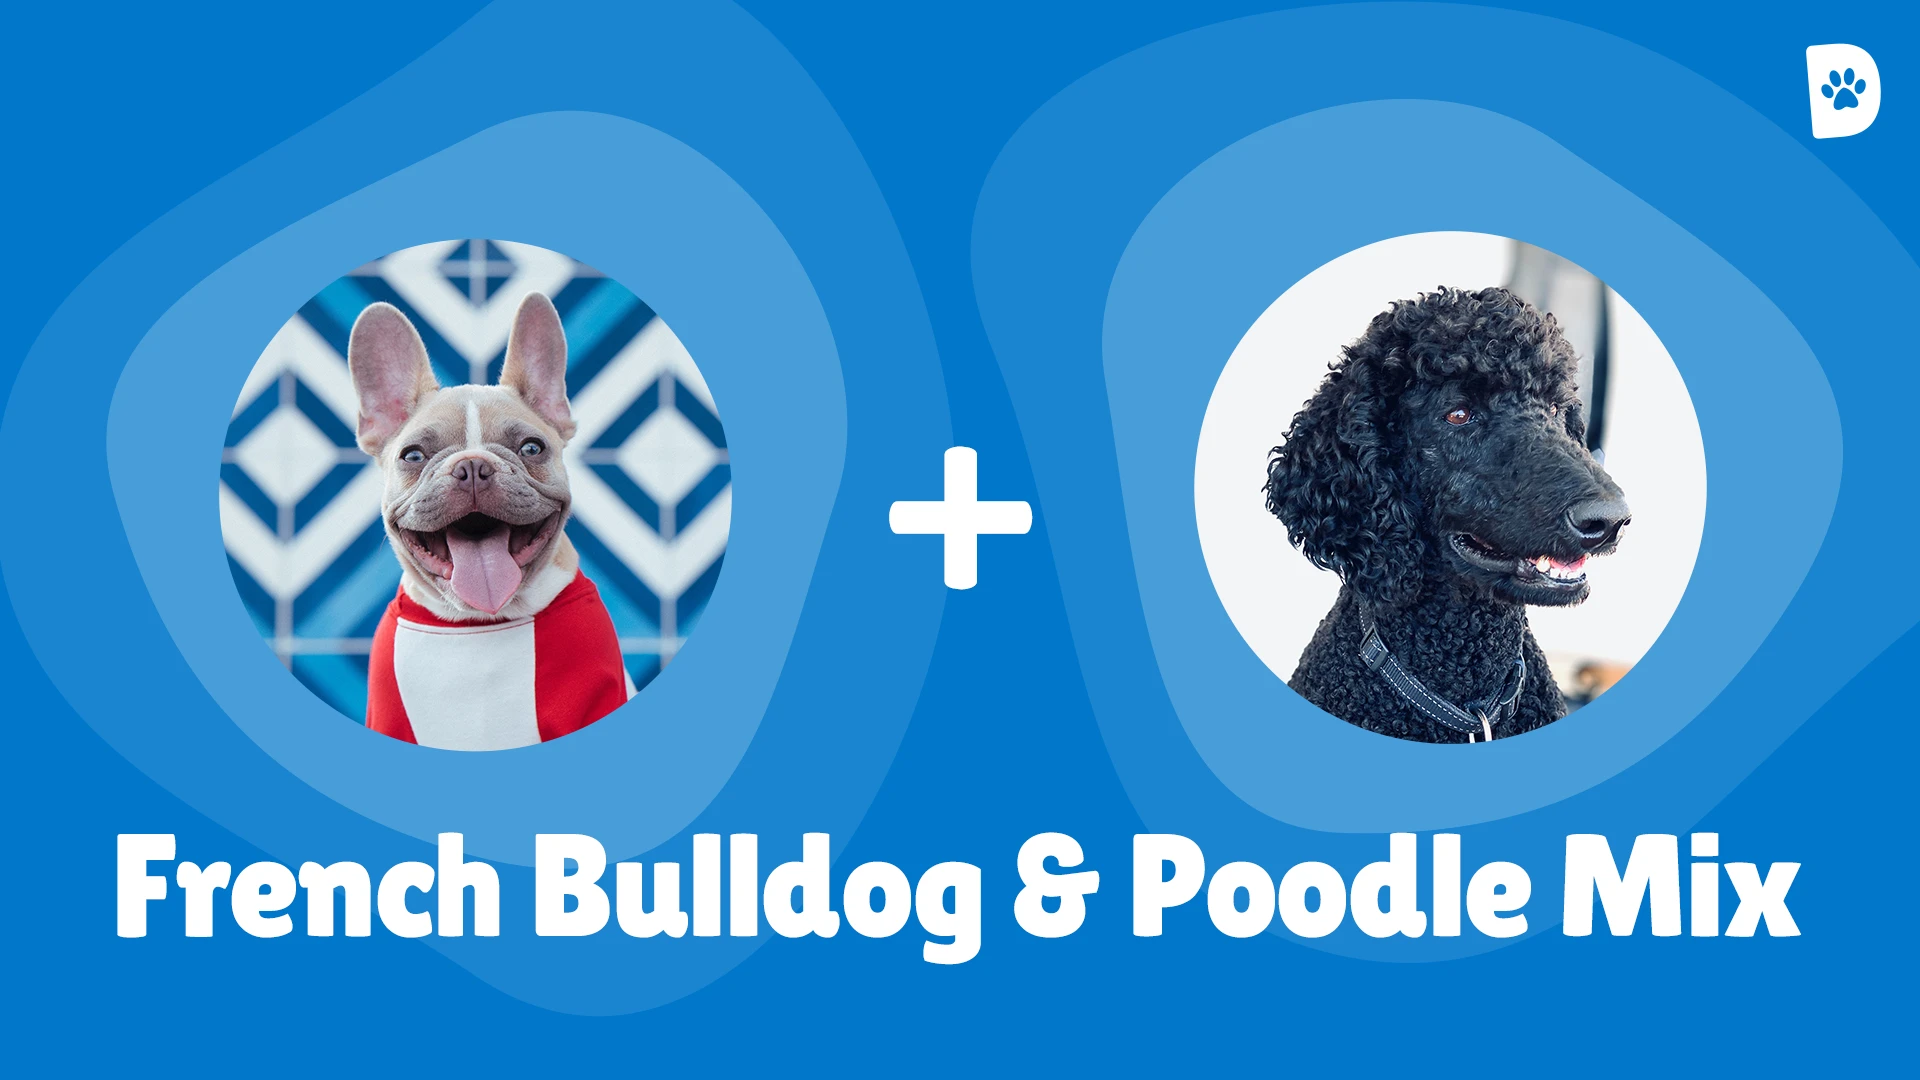 The French Boodle- Bulldog Poodle Mix